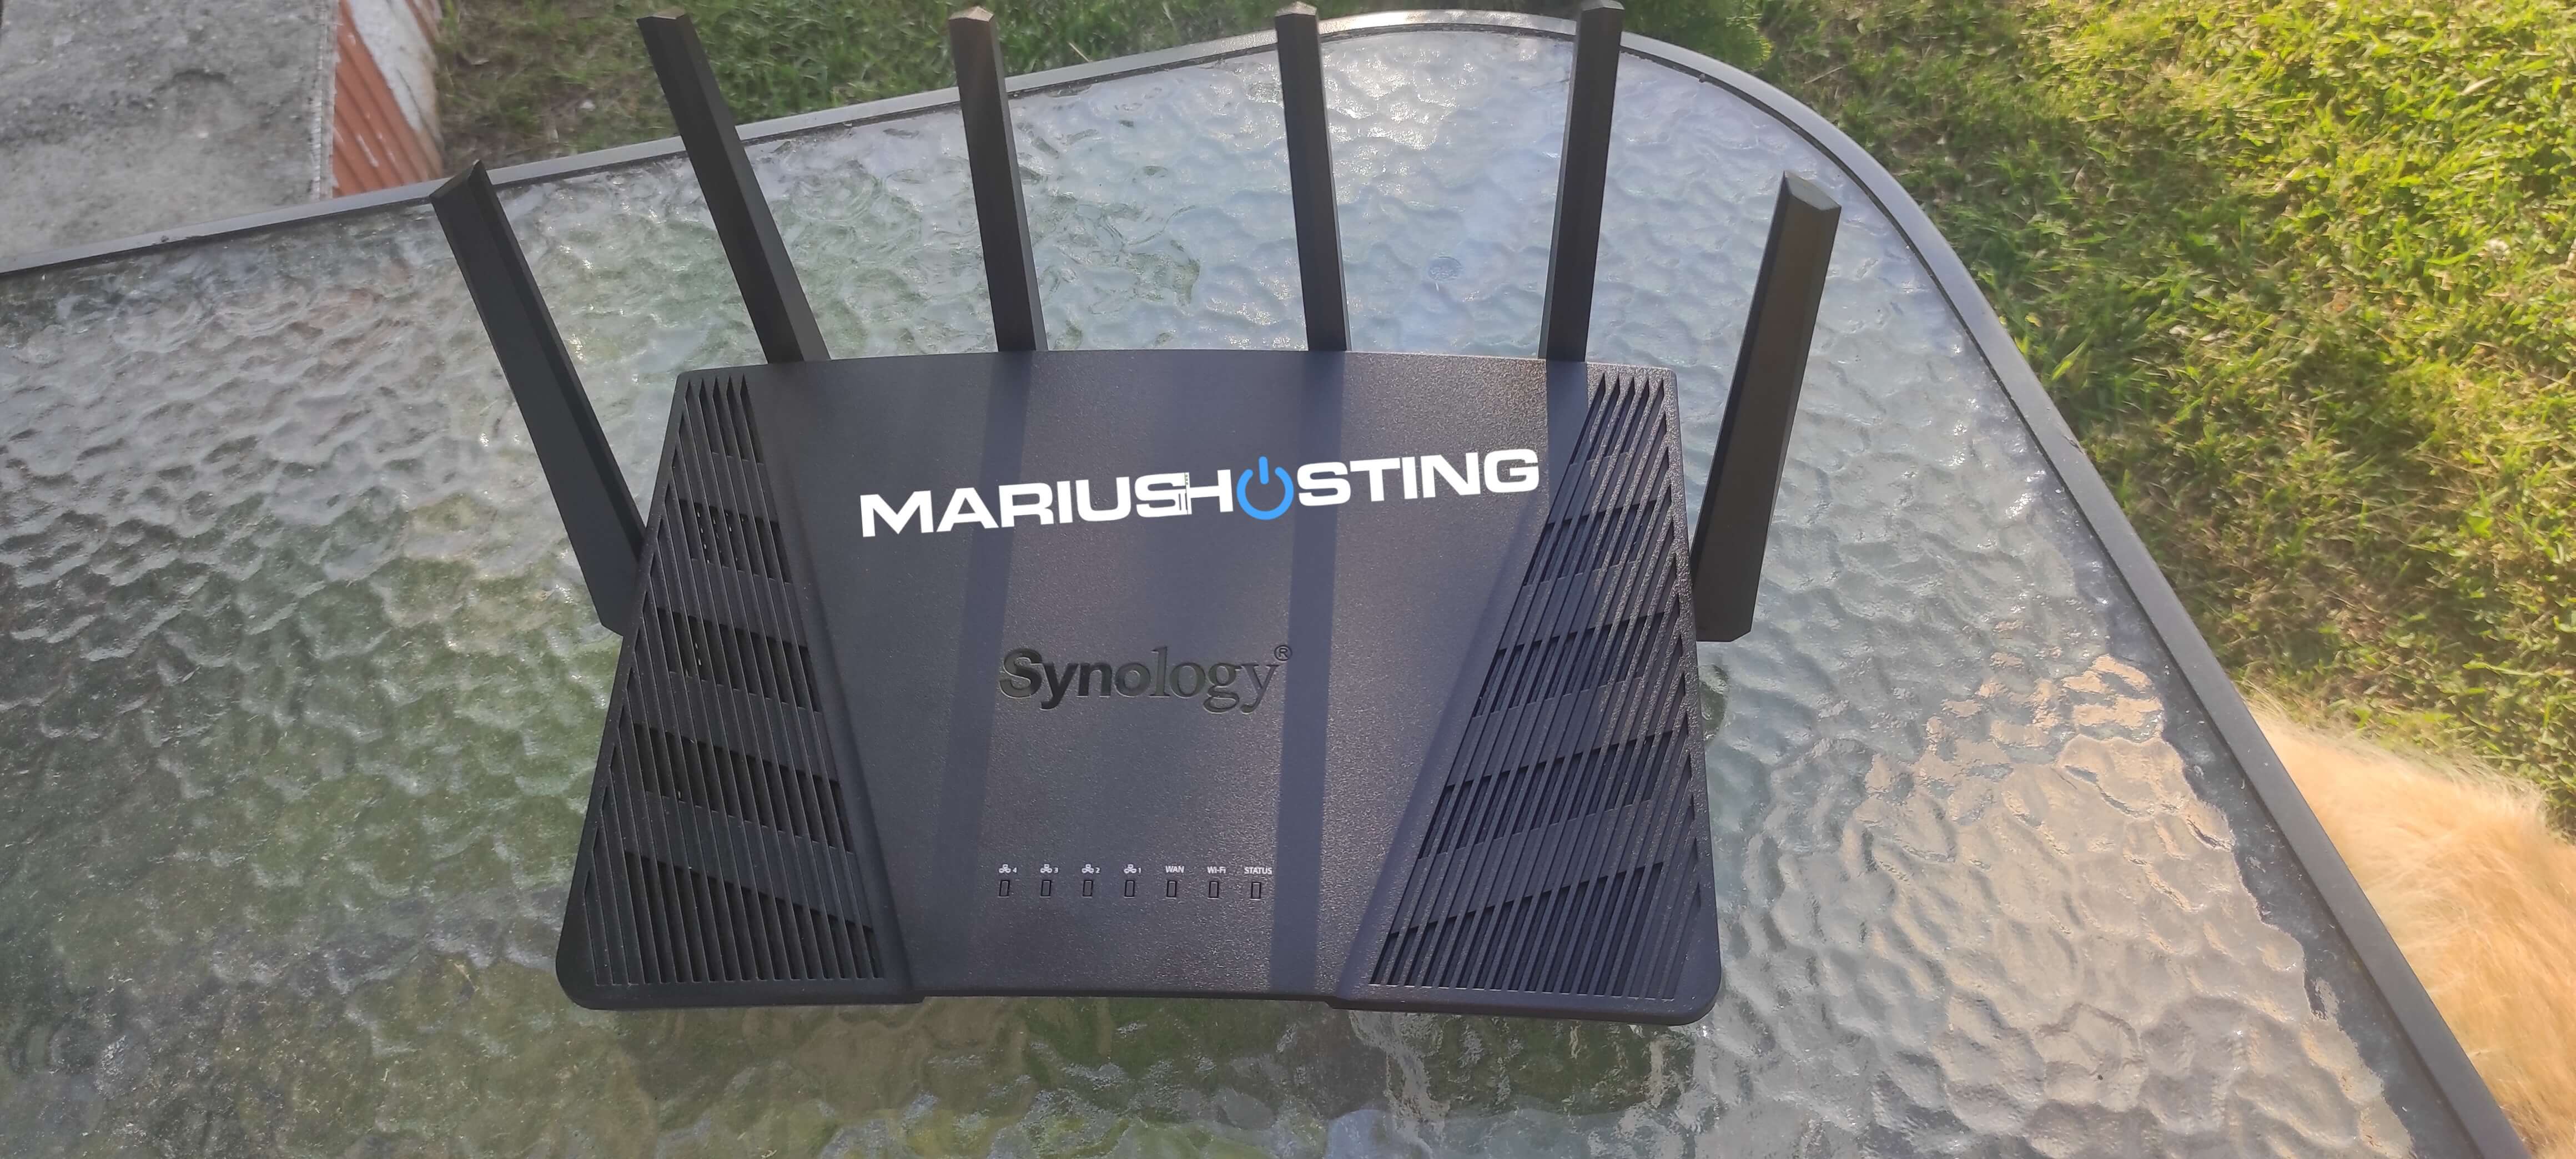 Synology RT6600ax mariushosting review 9